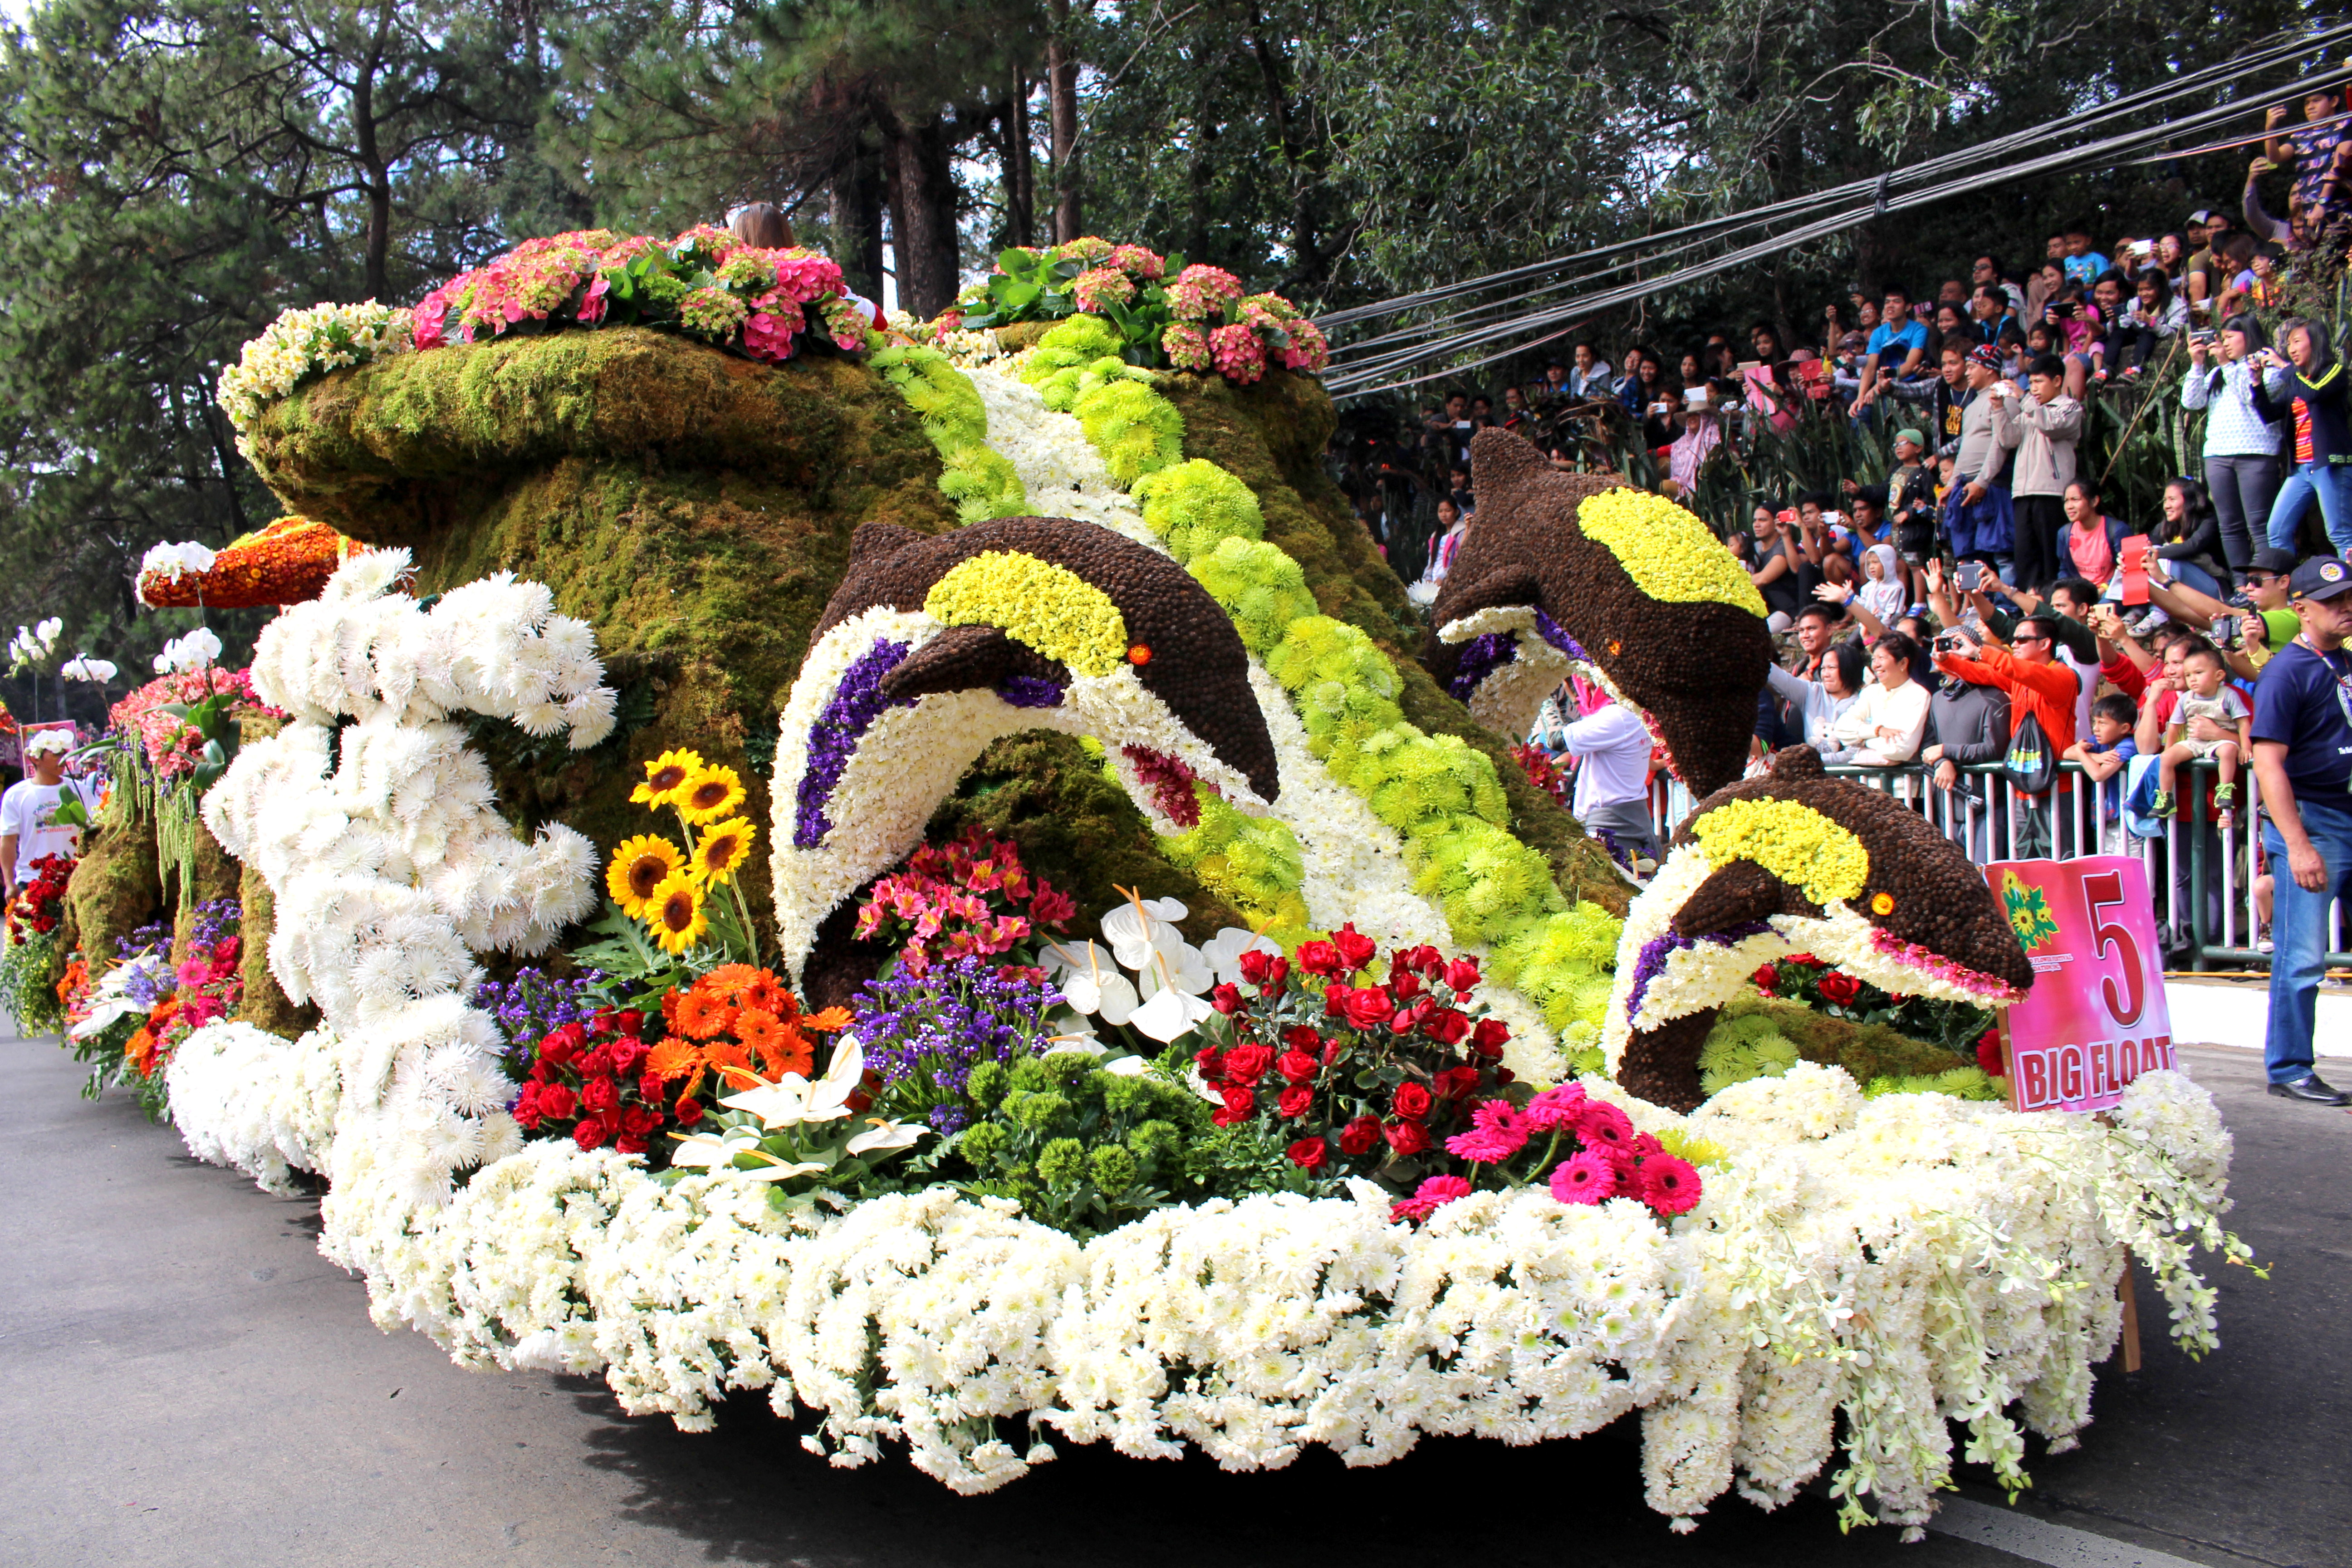 IN PHOTOS: Stunning floats in full bloom at Panagbenga 2016